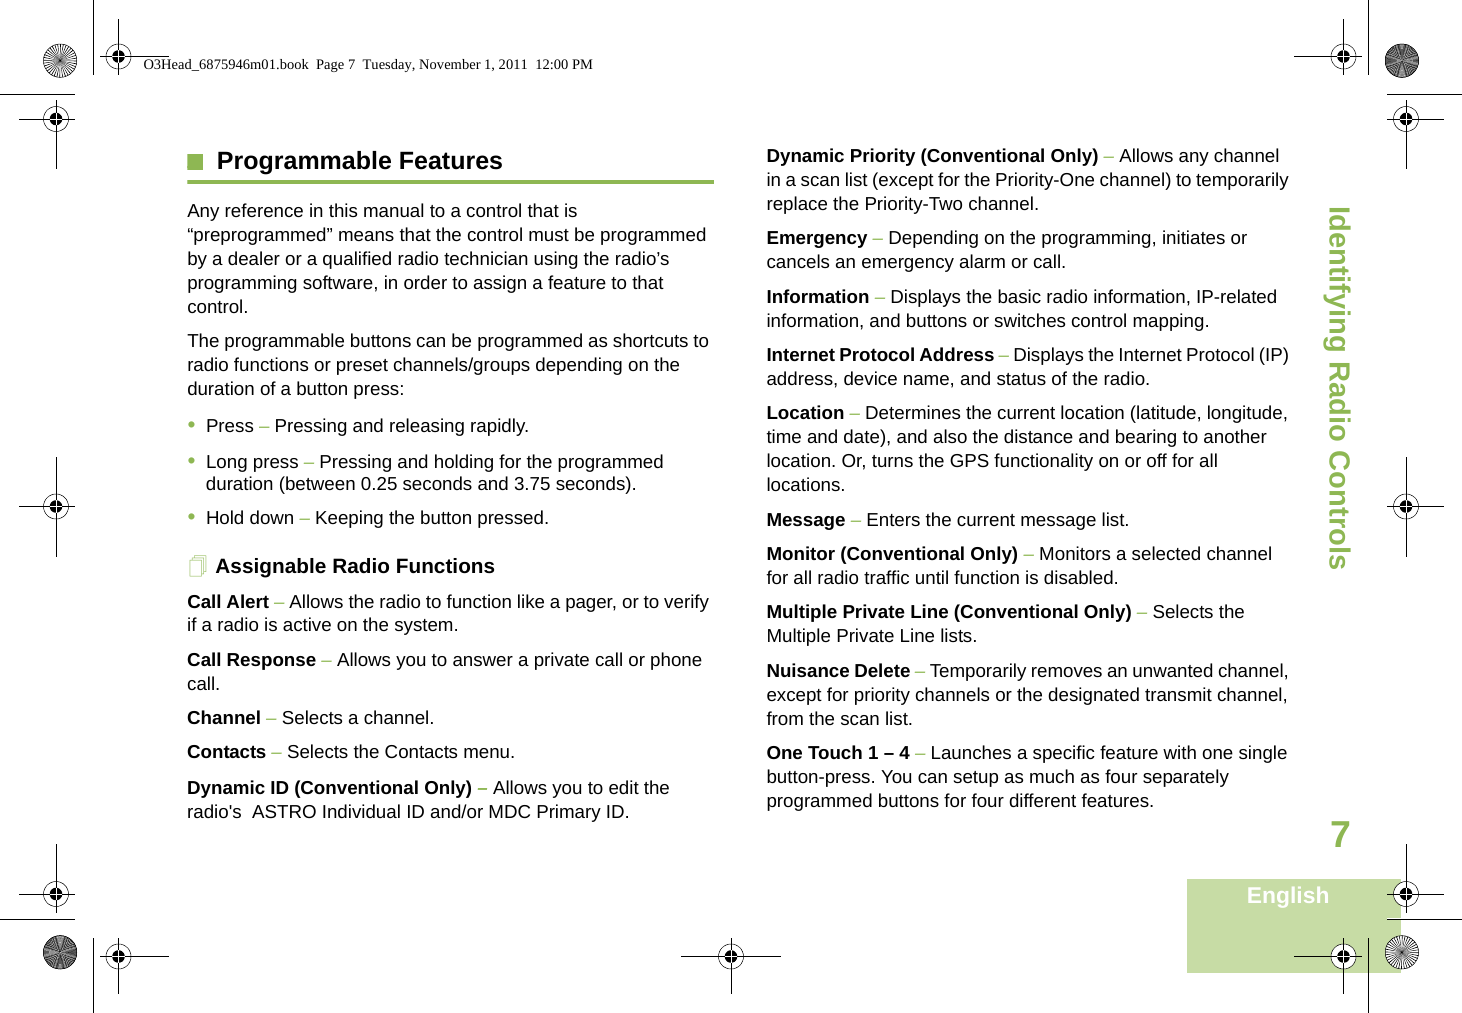 Identifying Radio ControlsEnglish7Programmable Features Any reference in this manual to a control that is “preprogrammed” means that the control must be programmed by a dealer or a qualified radio technician using the radio’s programming software, in order to assign a feature to that control.The programmable buttons can be programmed as shortcuts to radio functions or preset channels/groups depending on the duration of a button press:•Press – Pressing and releasing rapidly.•Long press – Pressing and holding for the programmed duration (between 0.25 seconds and 3.75 seconds).•Hold down – Keeping the button pressed.Assignable Radio FunctionsCall Alert – Allows the radio to function like a pager, or to verify if a radio is active on the system.Call Response – Allows you to answer a private call or phone call.Channel – Selects a channel.Contacts – Selects the Contacts menu.Dynamic ID (Conventional Only) – Allows you to edit the radio&apos;s  ASTRO Individual ID and/or MDC Primary ID.Dynamic Priority (Conventional Only) – Allows any channel in a scan list (except for the Priority-One channel) to temporarily replace the Priority-Two channel.Emergency – Depending on the programming, initiates or cancels an emergency alarm or call.Information – Displays the basic radio information, IP-related information, and buttons or switches control mapping.Internet Protocol Address – Displays the Internet Protocol (IP) address, device name, and status of the radio.Location – Determines the current location (latitude, longitude, time and date), and also the distance and bearing to another location. Or, turns the GPS functionality on or off for all locations.Message – Enters the current message list.Monitor (Conventional Only) – Monitors a selected channel for all radio traffic until function is disabled.Multiple Private Line (Conventional Only) – Selects the Multiple Private Line lists.Nuisance Delete – Temporarily removes an unwanted channel, except for priority channels or the designated transmit channel, from the scan list.  One Touch 1 – 4 – Launches a specific feature with one single button-press. You can setup as much as four separately programmed buttons for four different features.O3Head_6875946m01.book  Page 7  Tuesday, November 1, 2011  12:00 PM